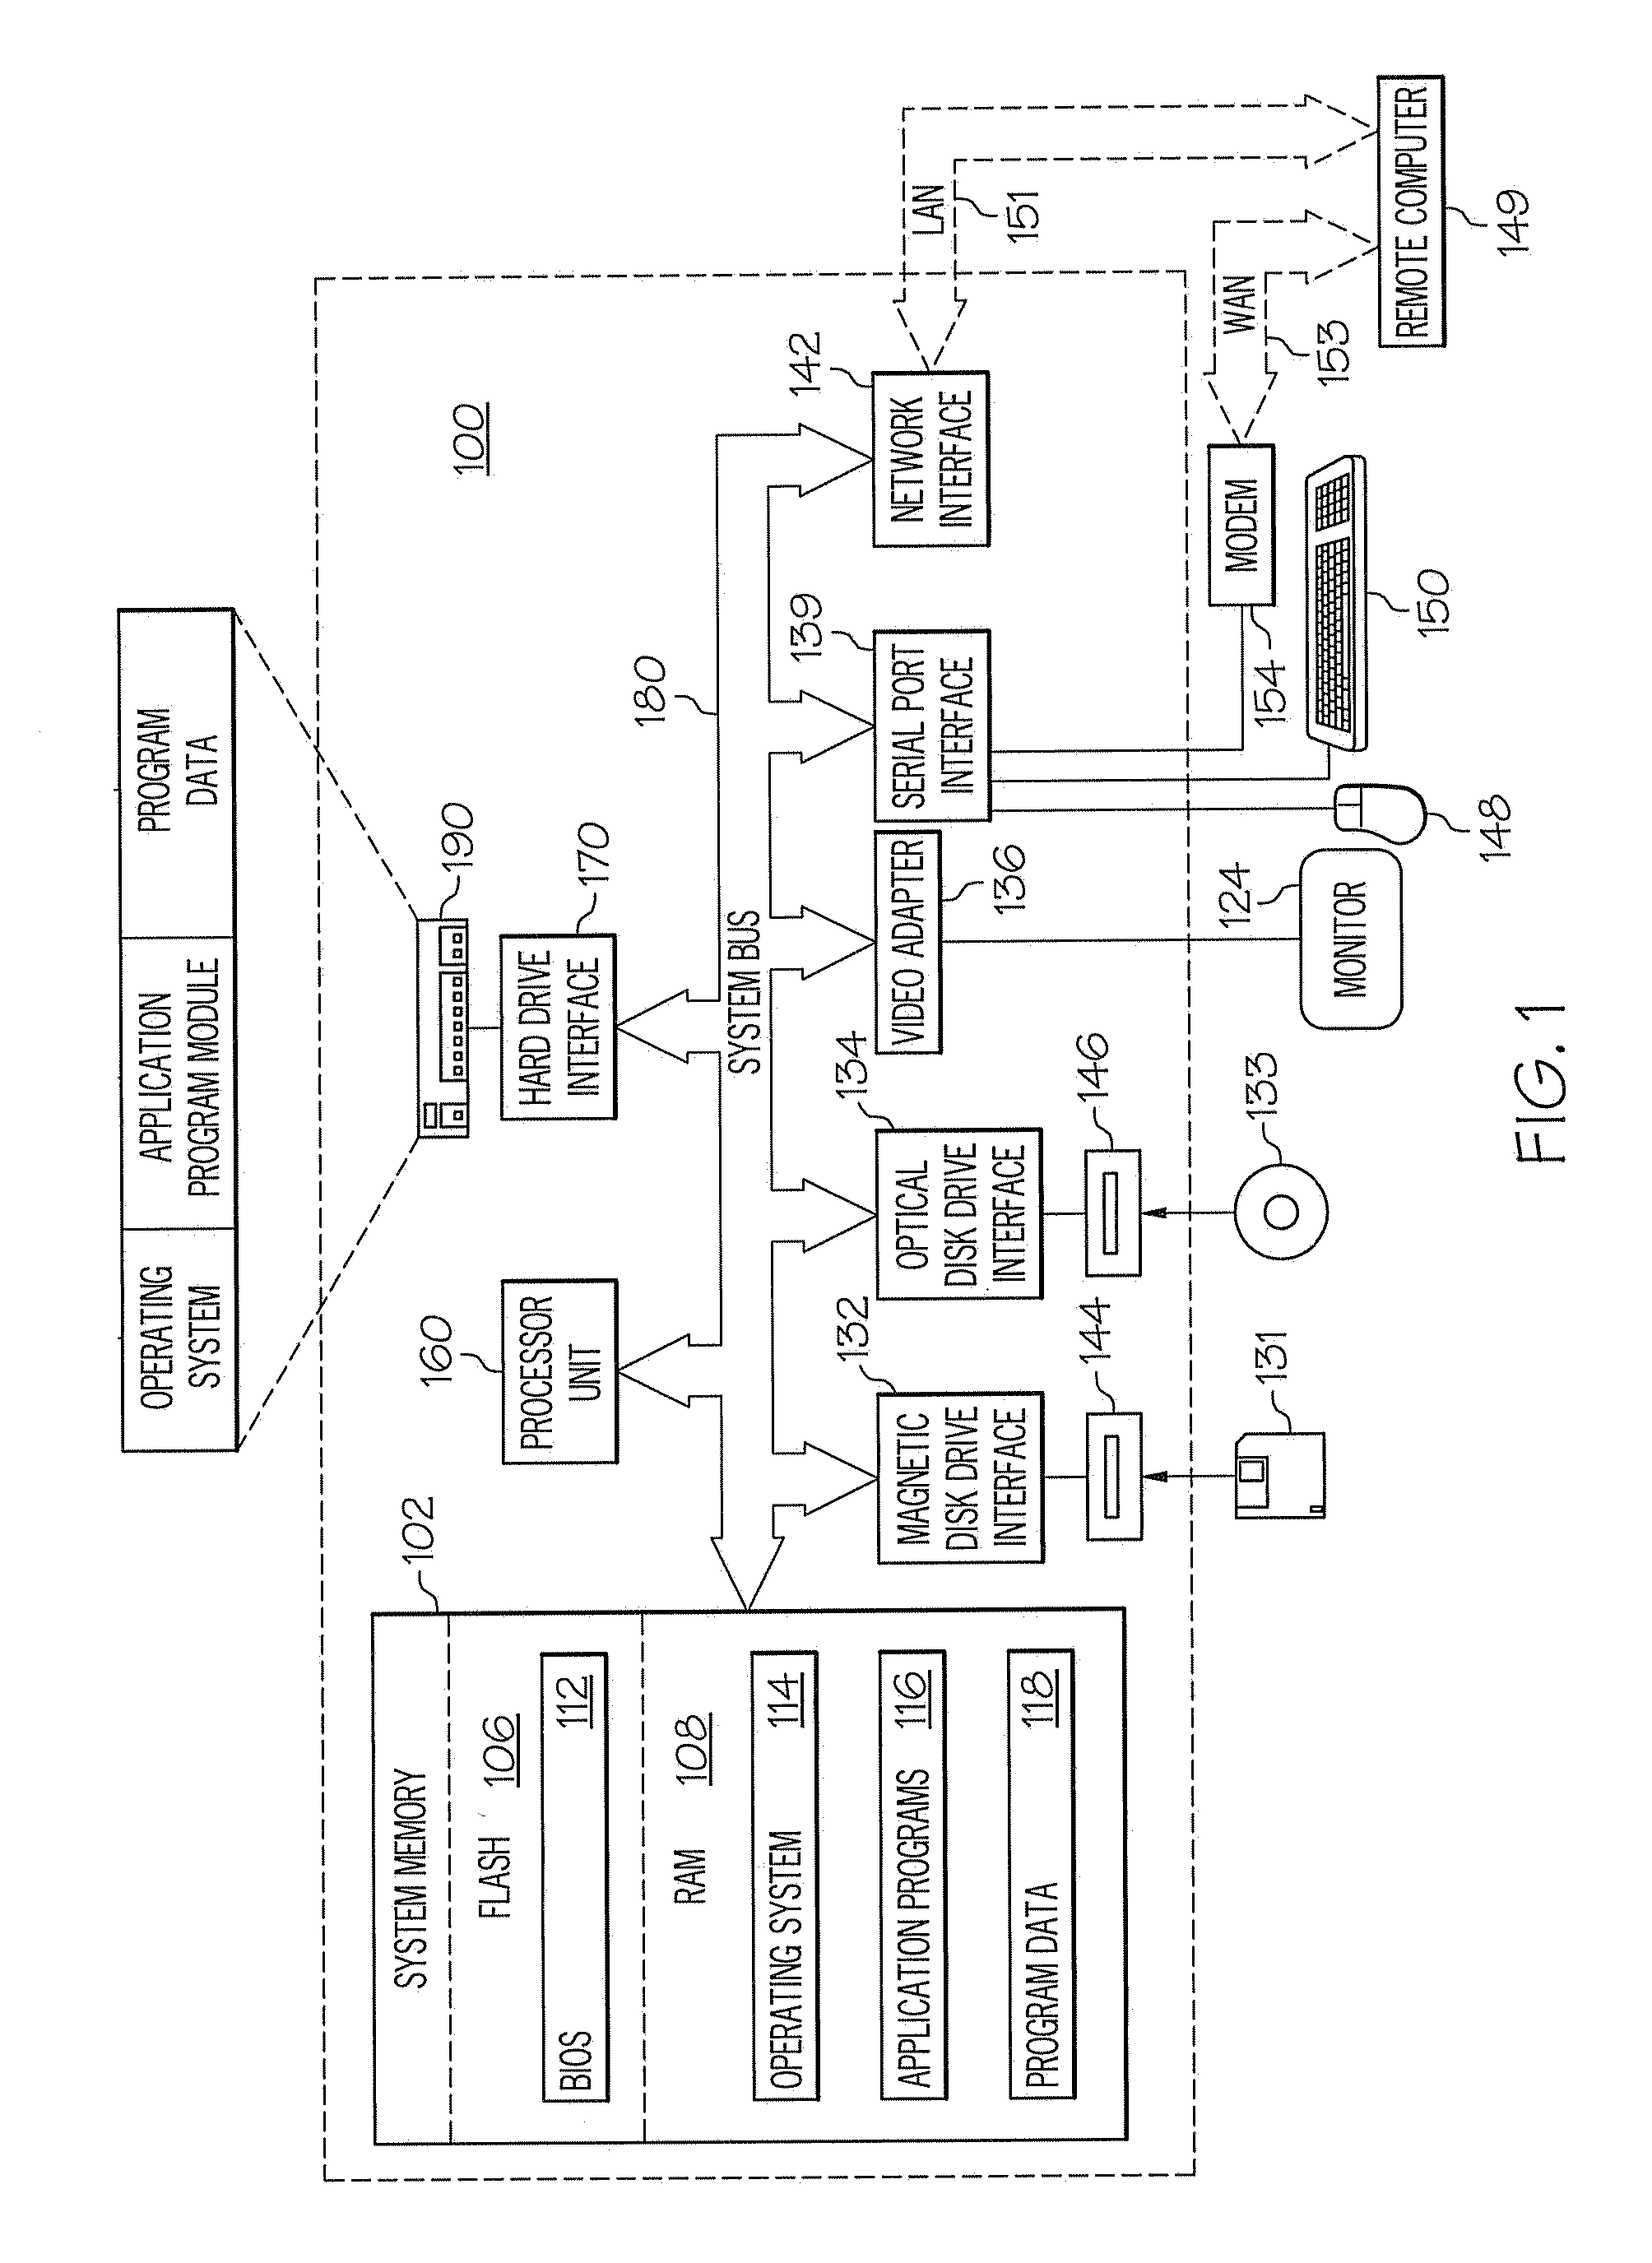 System and Method for Optimizing Compiler Performance by Object Collocation